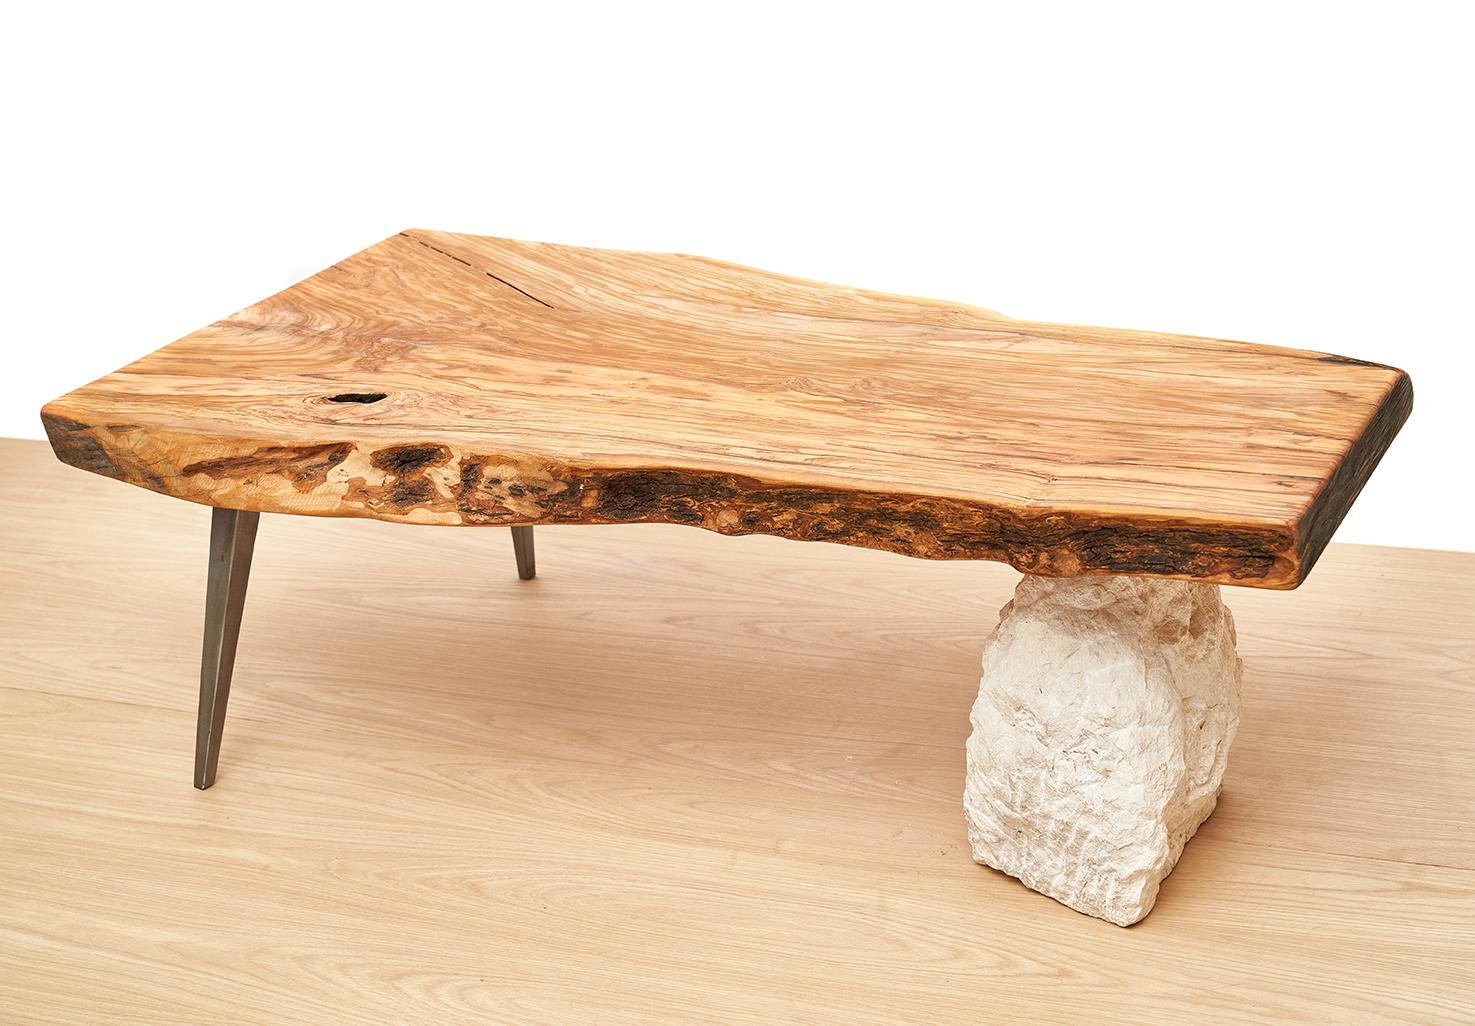 Arte center table by Jean-Baptiste Van den Heede
Signed Unique Piece
Dimensions: L 130 x D 63 x H 43 cm
Materials: Olive Wood

Design tables from the ARTE collection in walnut wood with metal legs or legs in oak and hand-carved natural